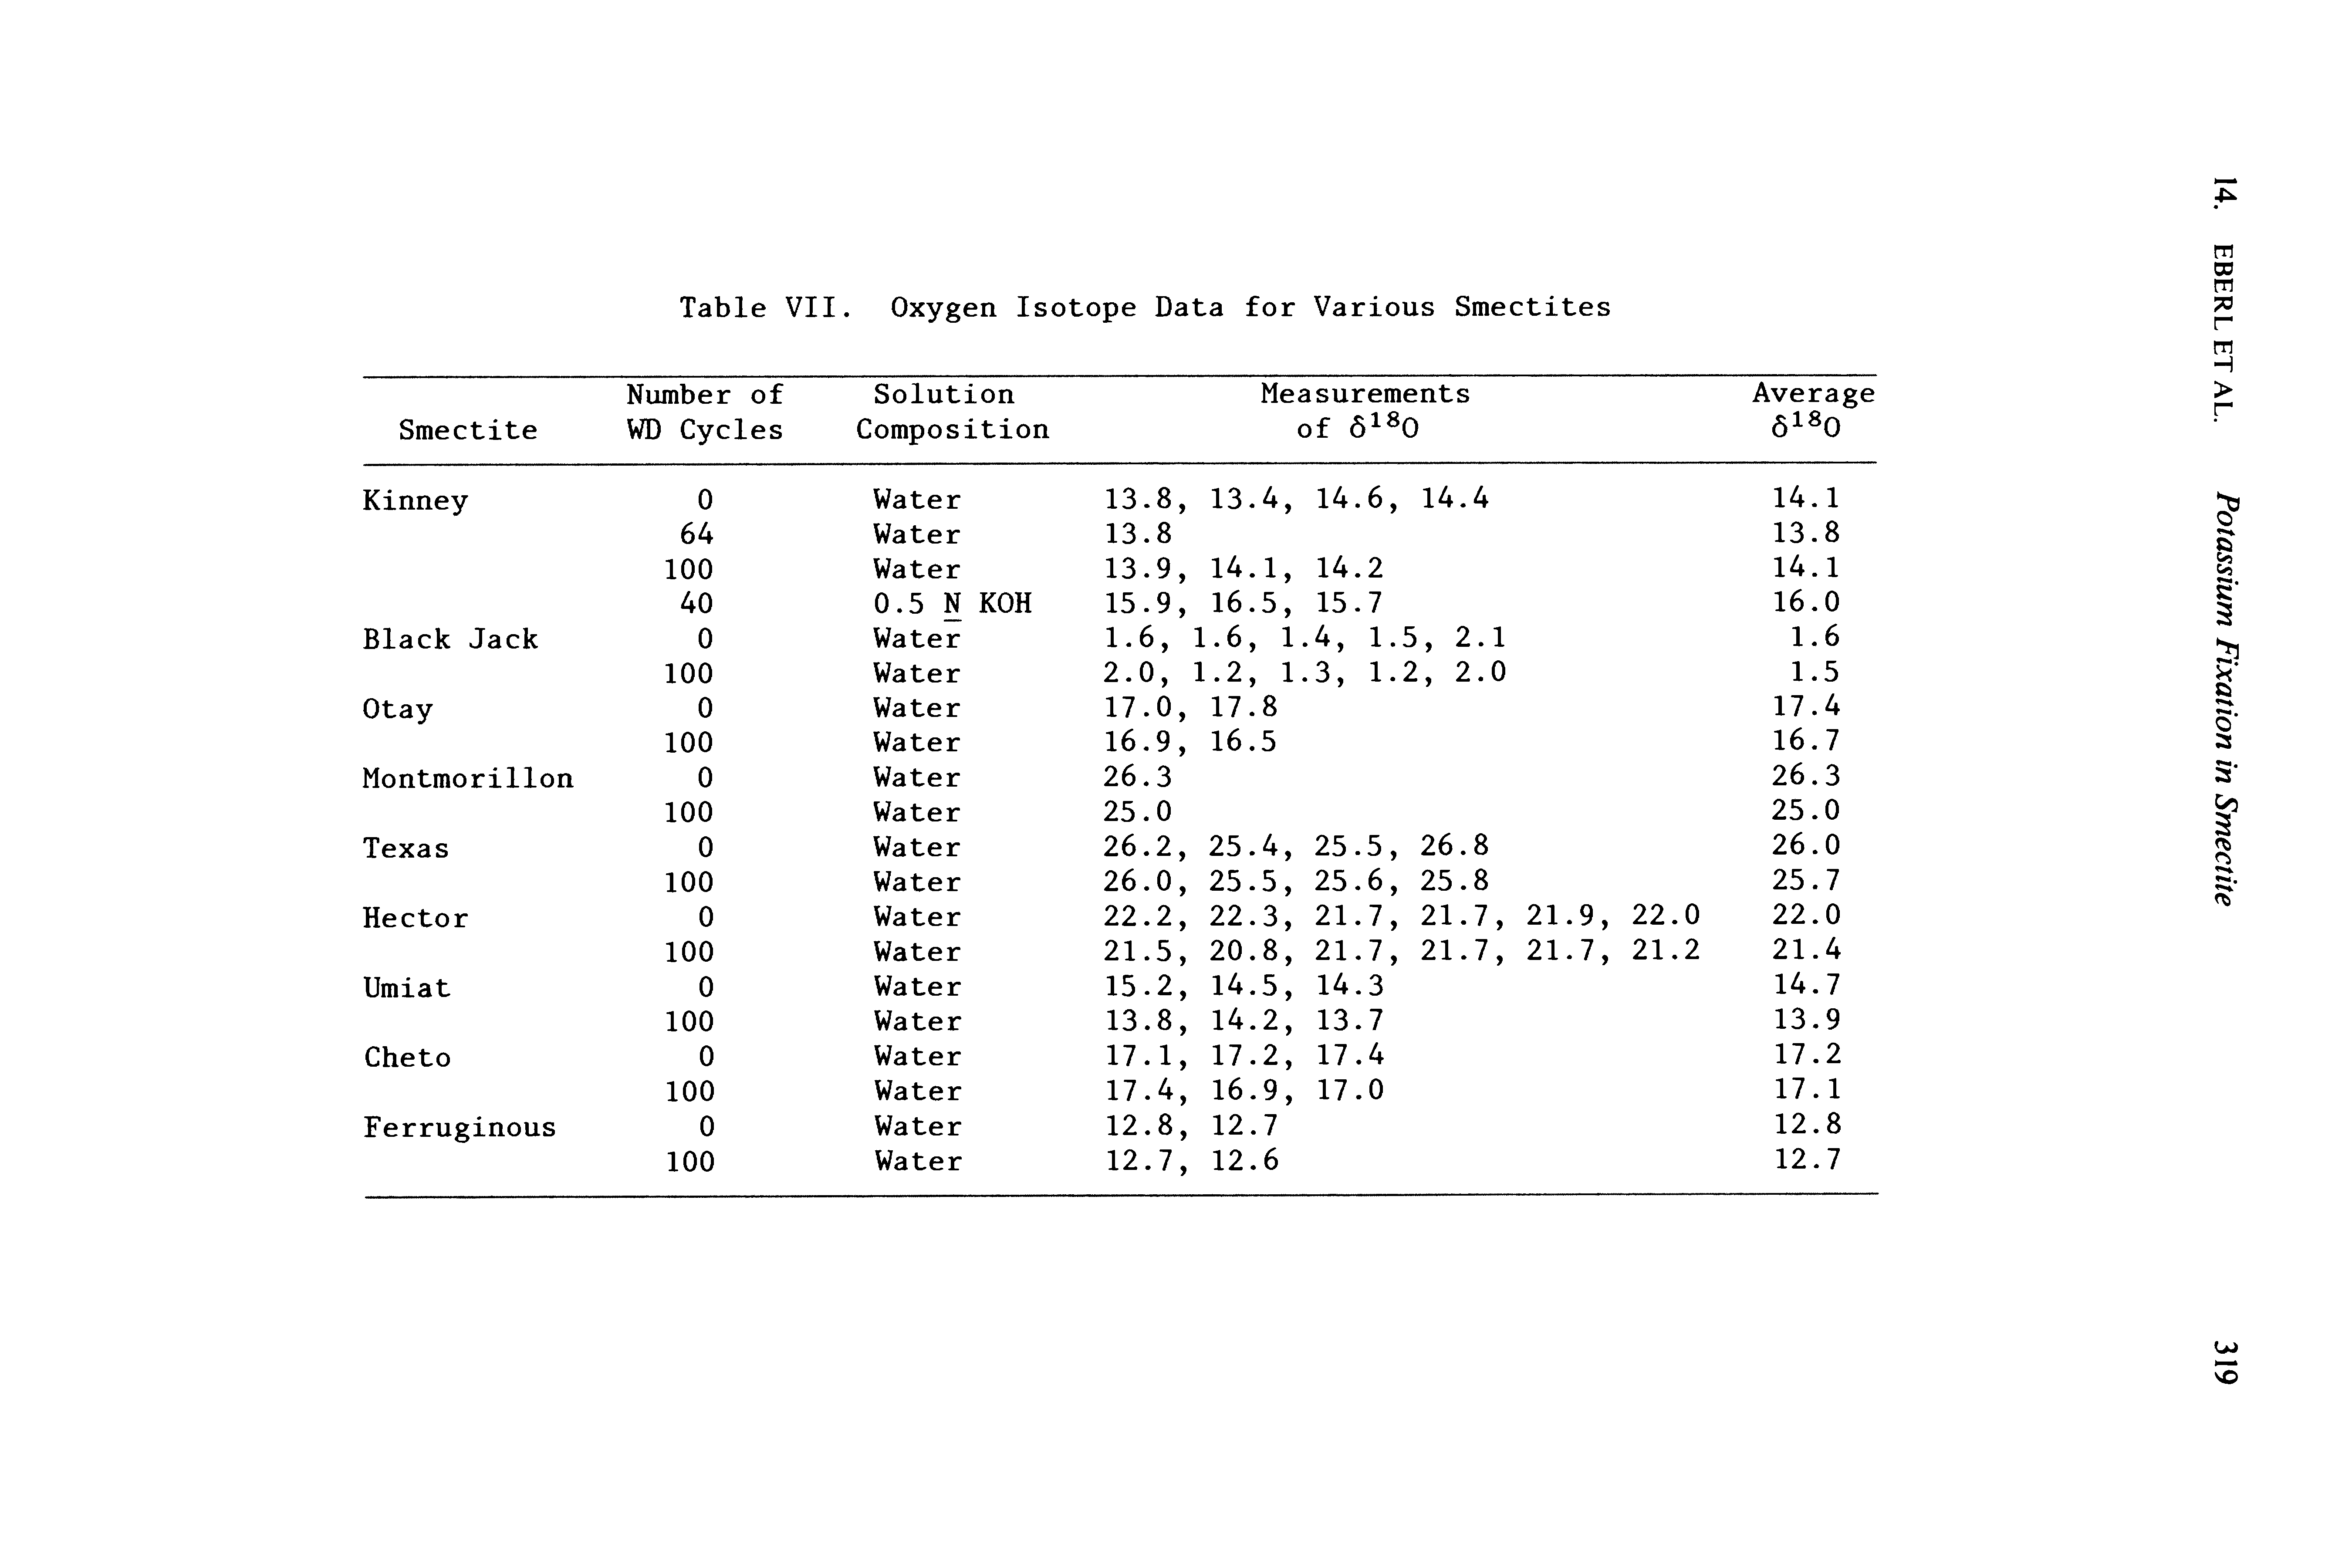 Table VII. Oxygen Isotope Data for Various Smectites...